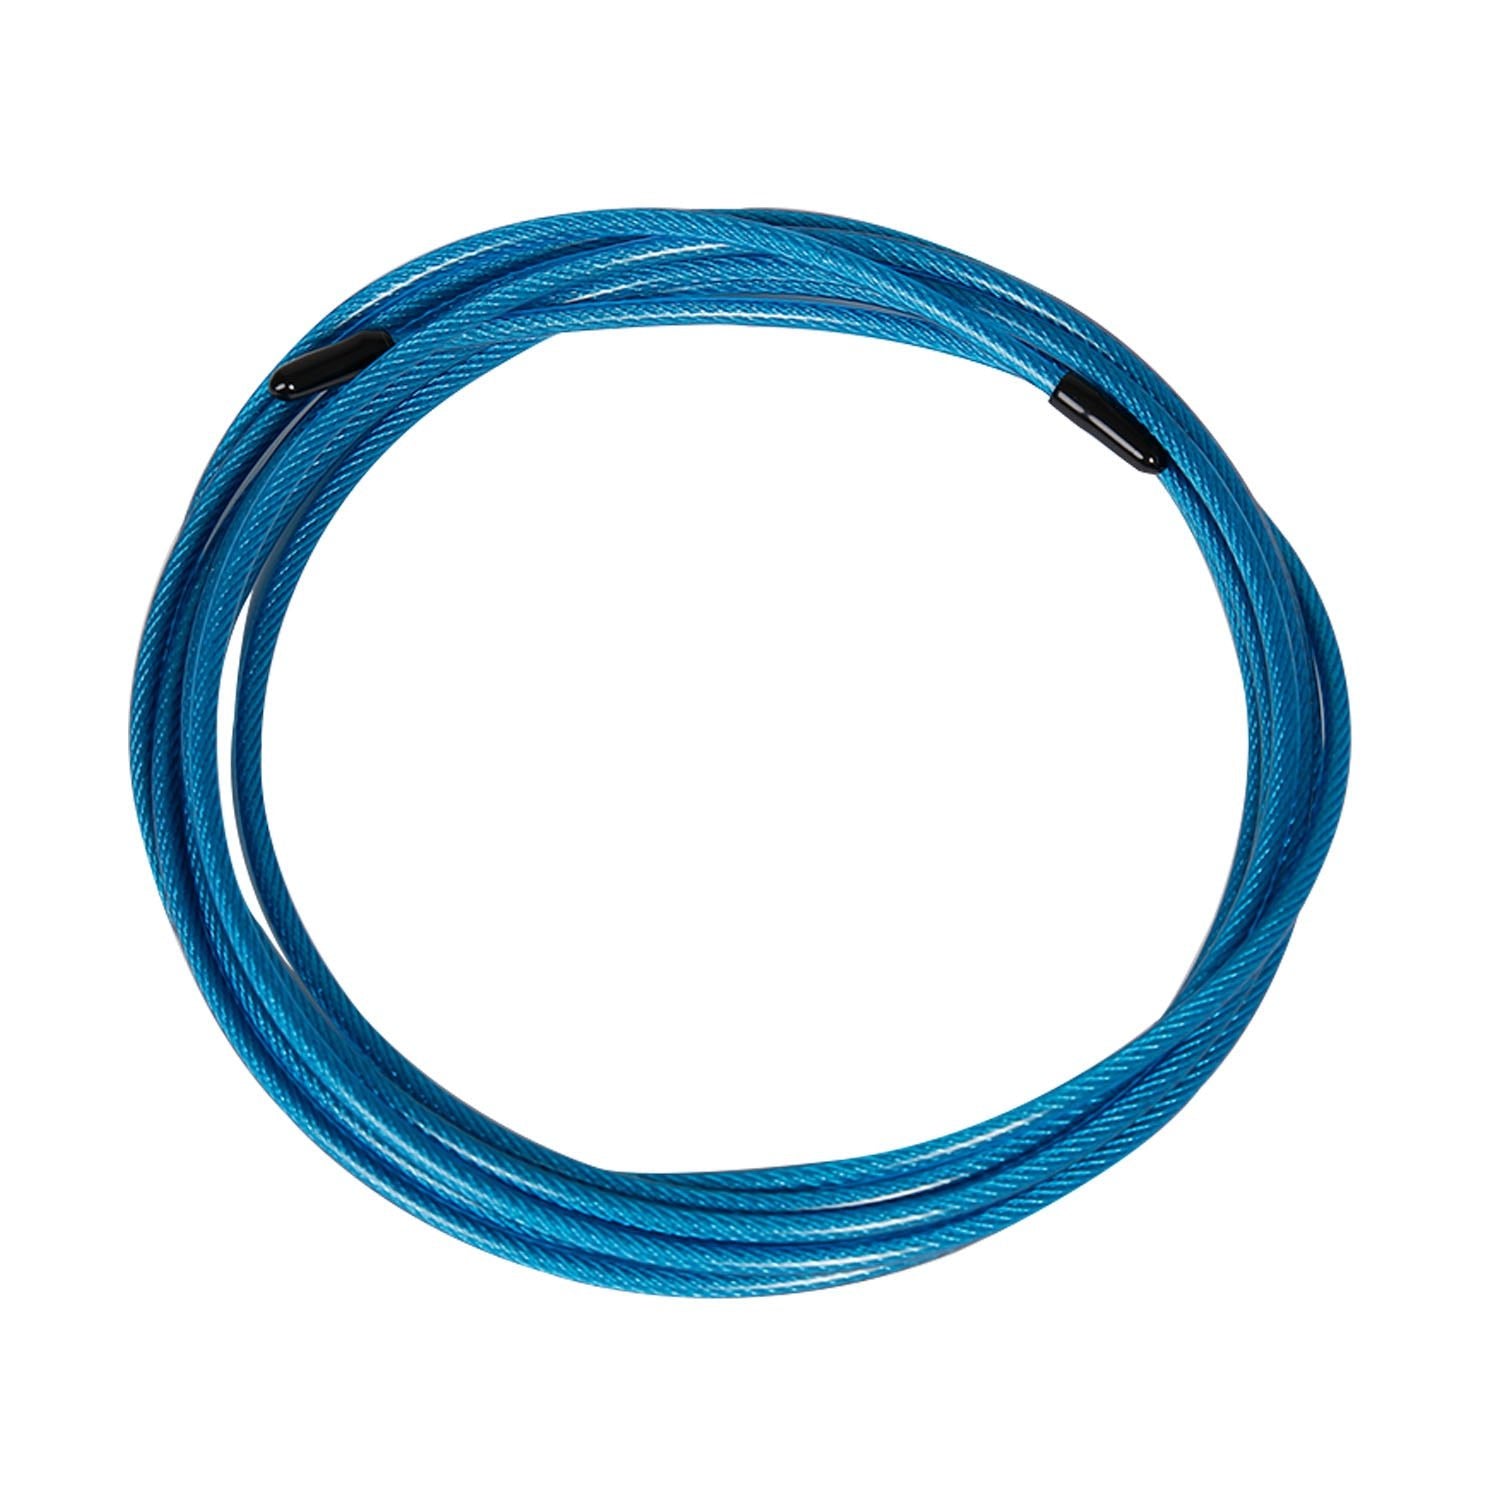 GND SR Skipping Rope Replacement Rope // Blue 3.4mm - SR Skipping Rope- GND Fitness